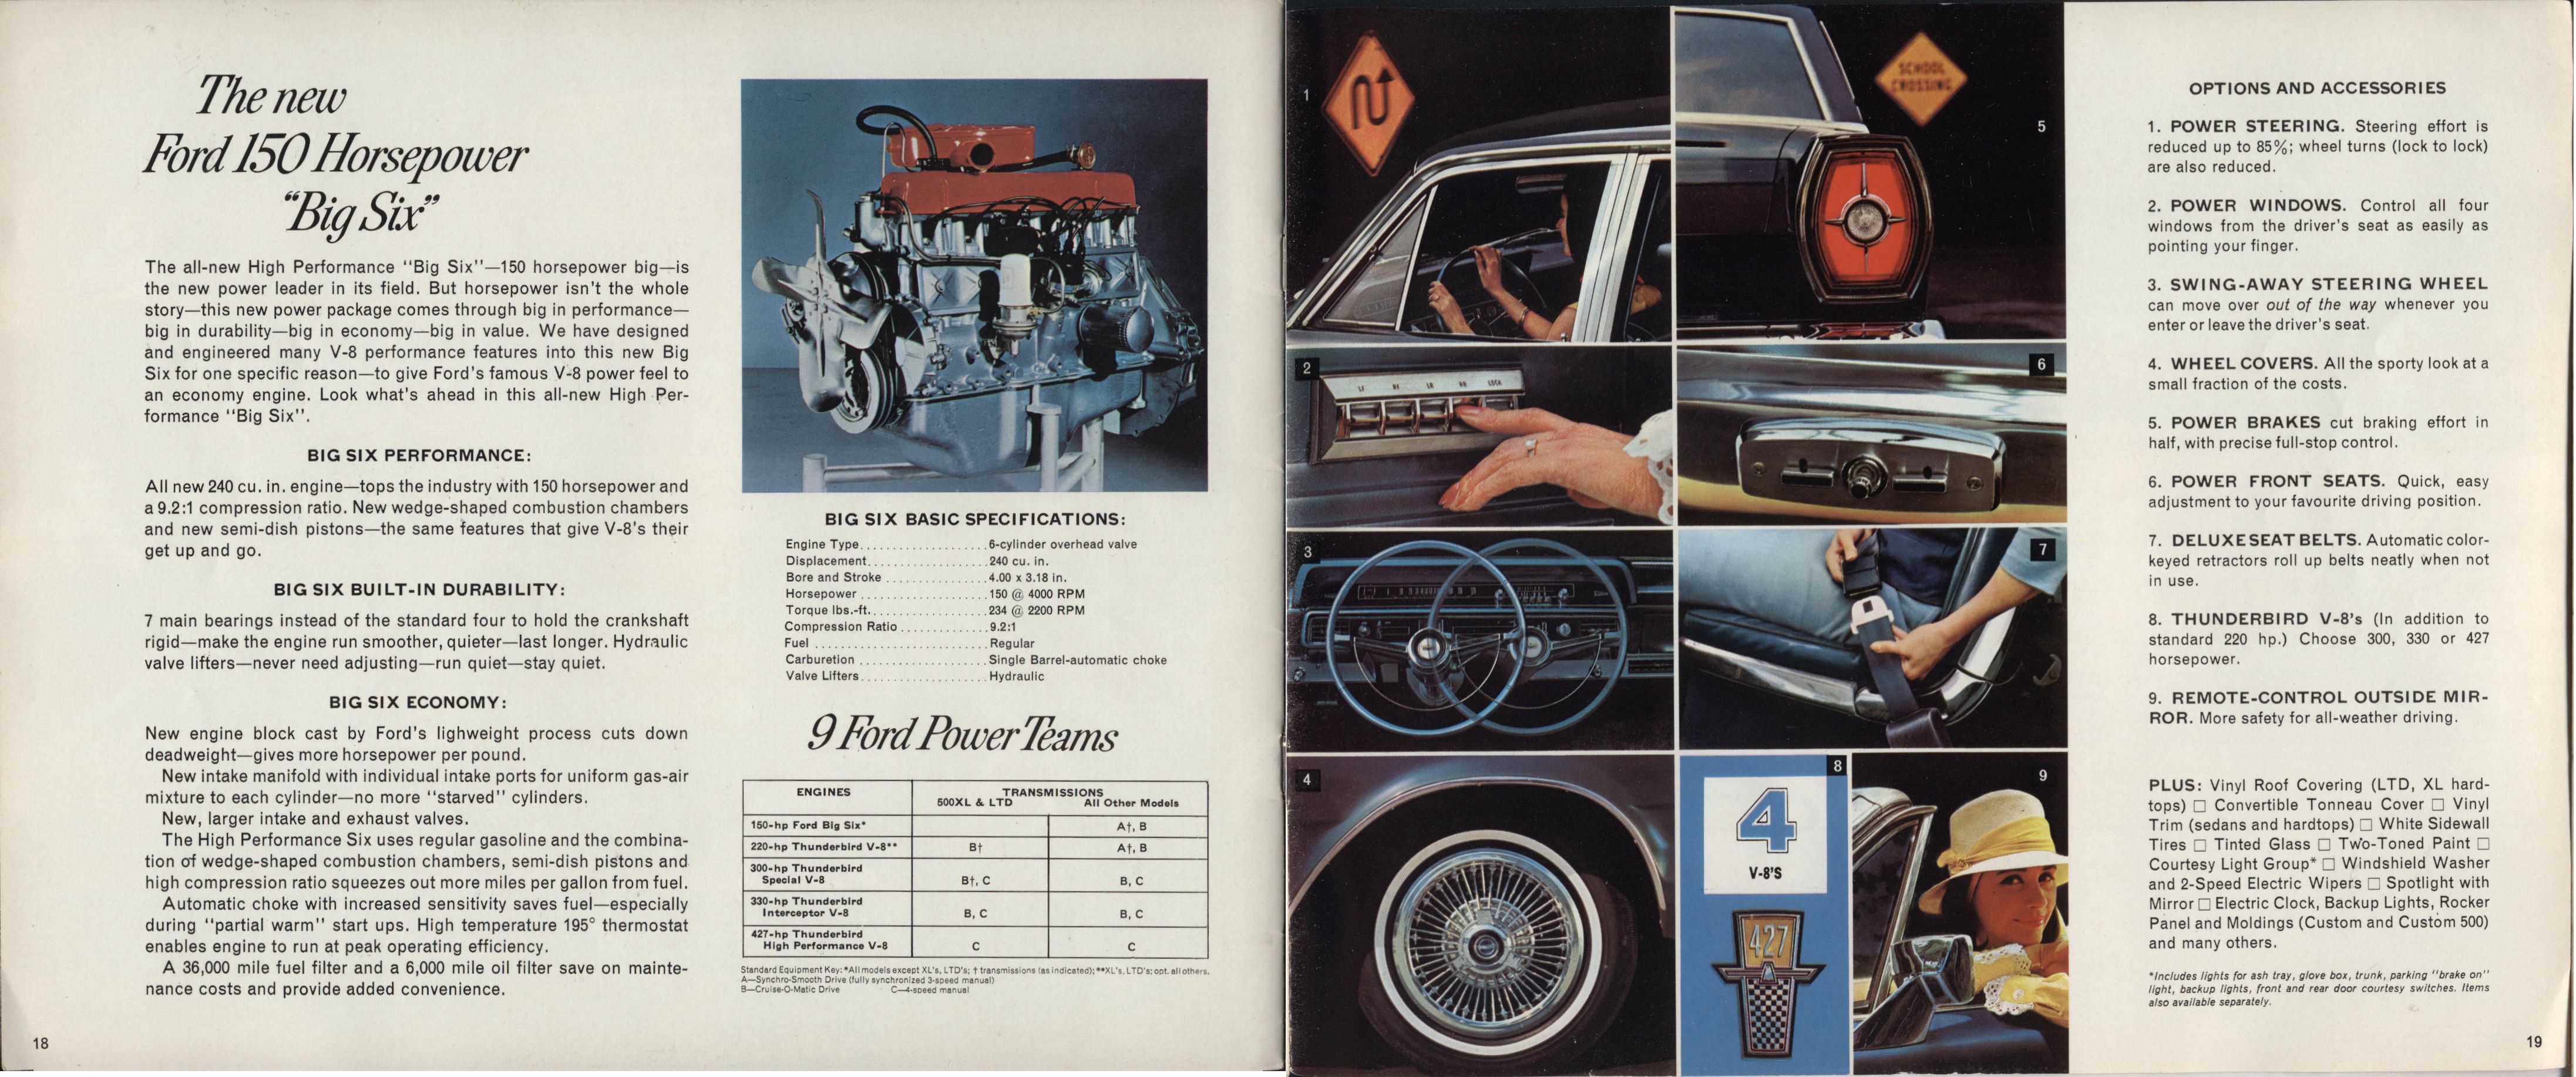 1965 Ford Full Size Brochure Canada 18-19